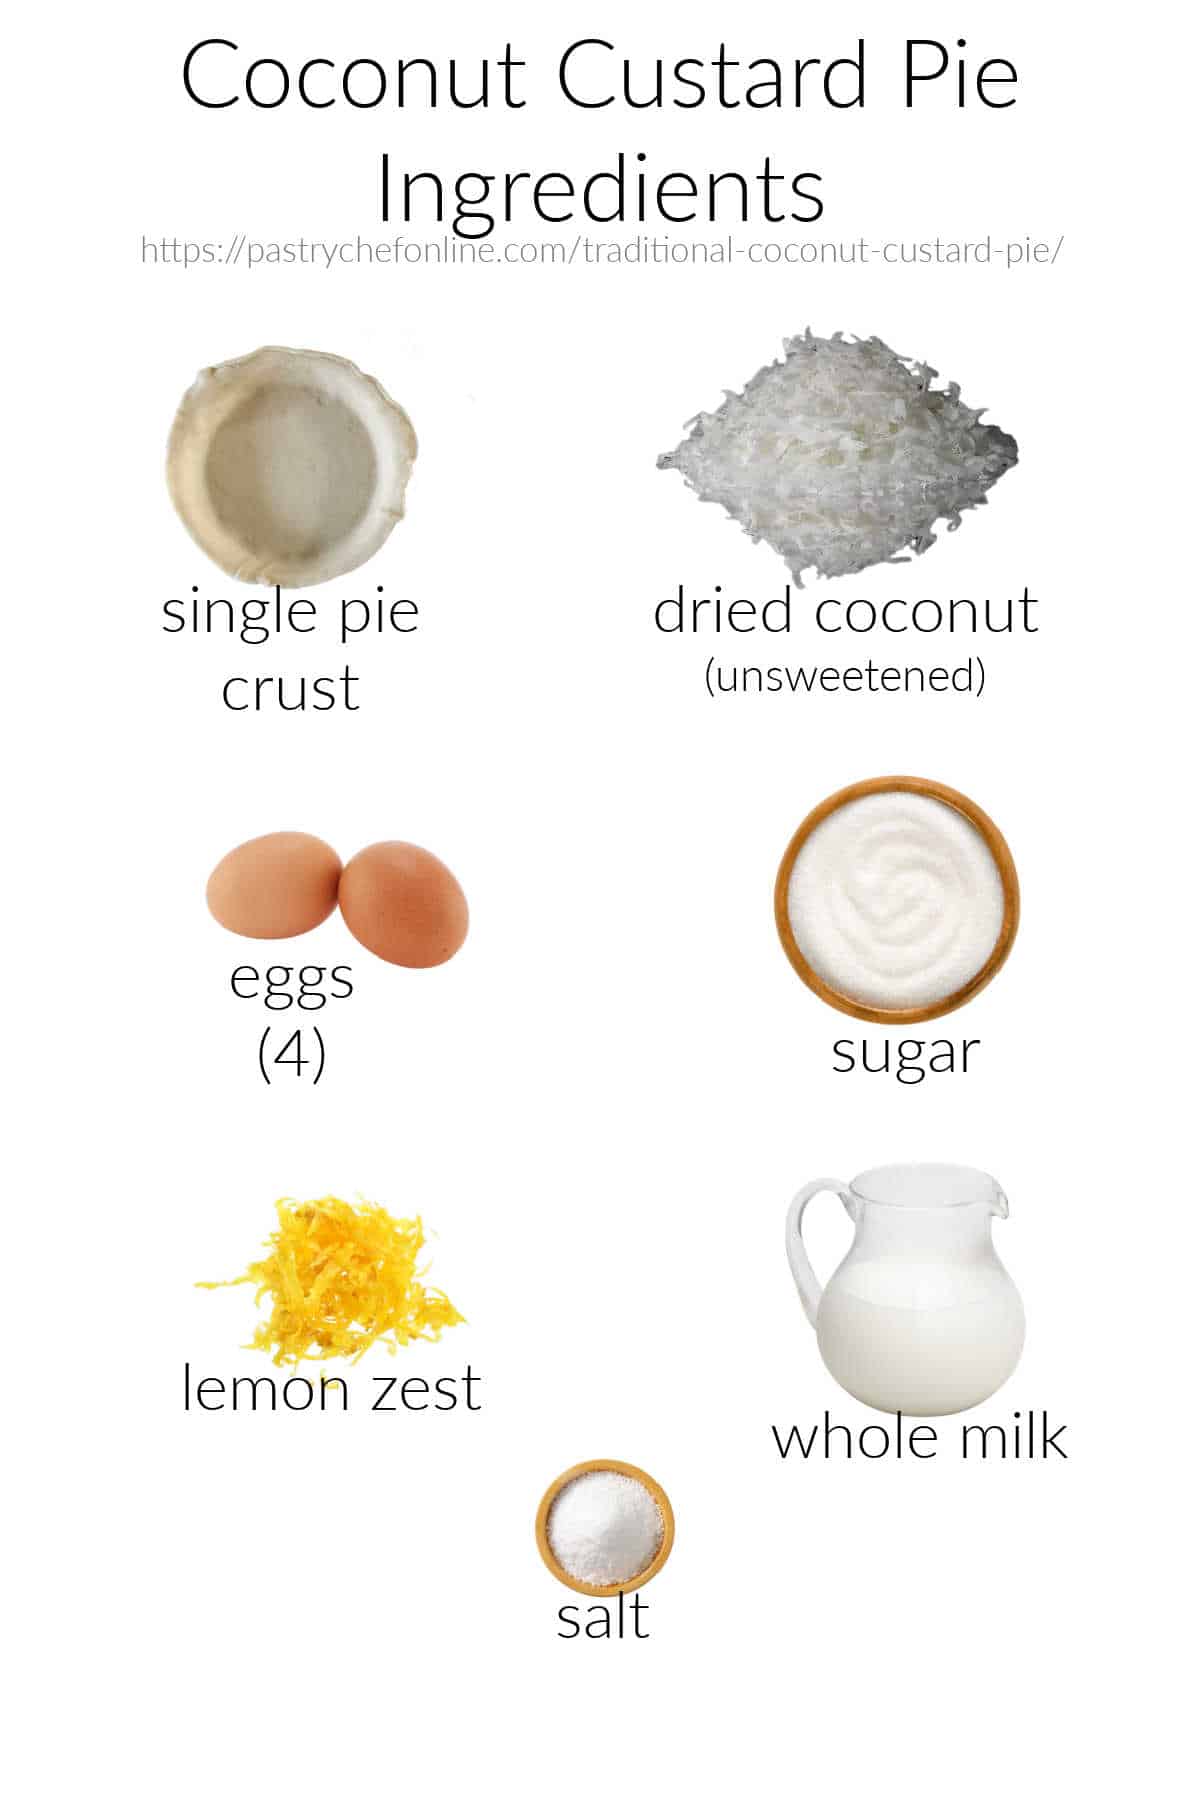 Images of all the all the ingredients needed to make a coconut custard pie, labeled and shot against a white background.